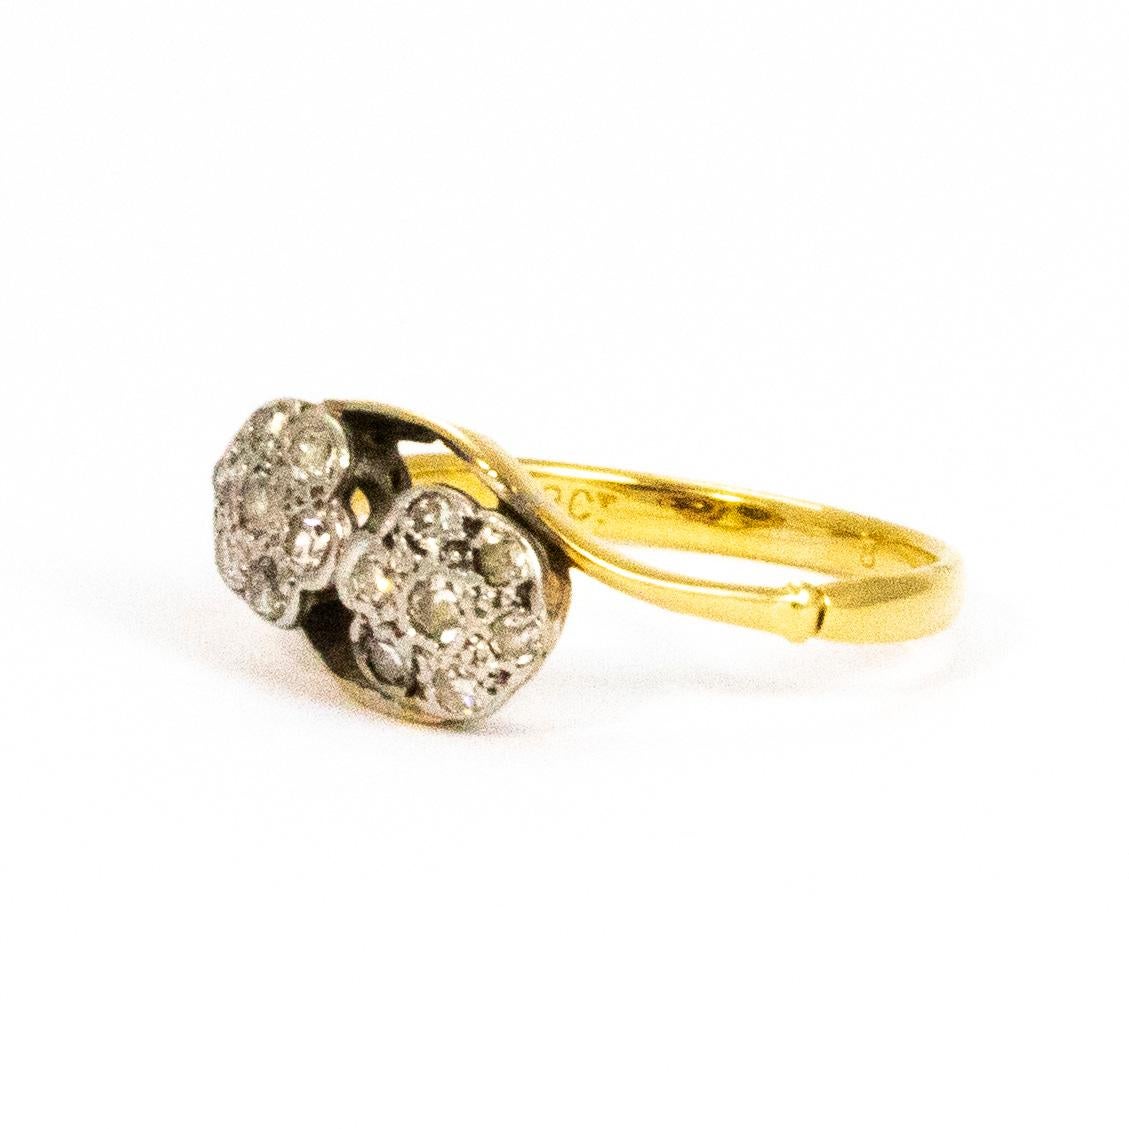 This wonderful double diamond cluster holds sparkling diamonds measuring 4pts each at the centre and around the centre stone the diamonds measure 3pts. The clusters are wonderfully twisted and the ring is modelled in 18ct gold and the stones set in